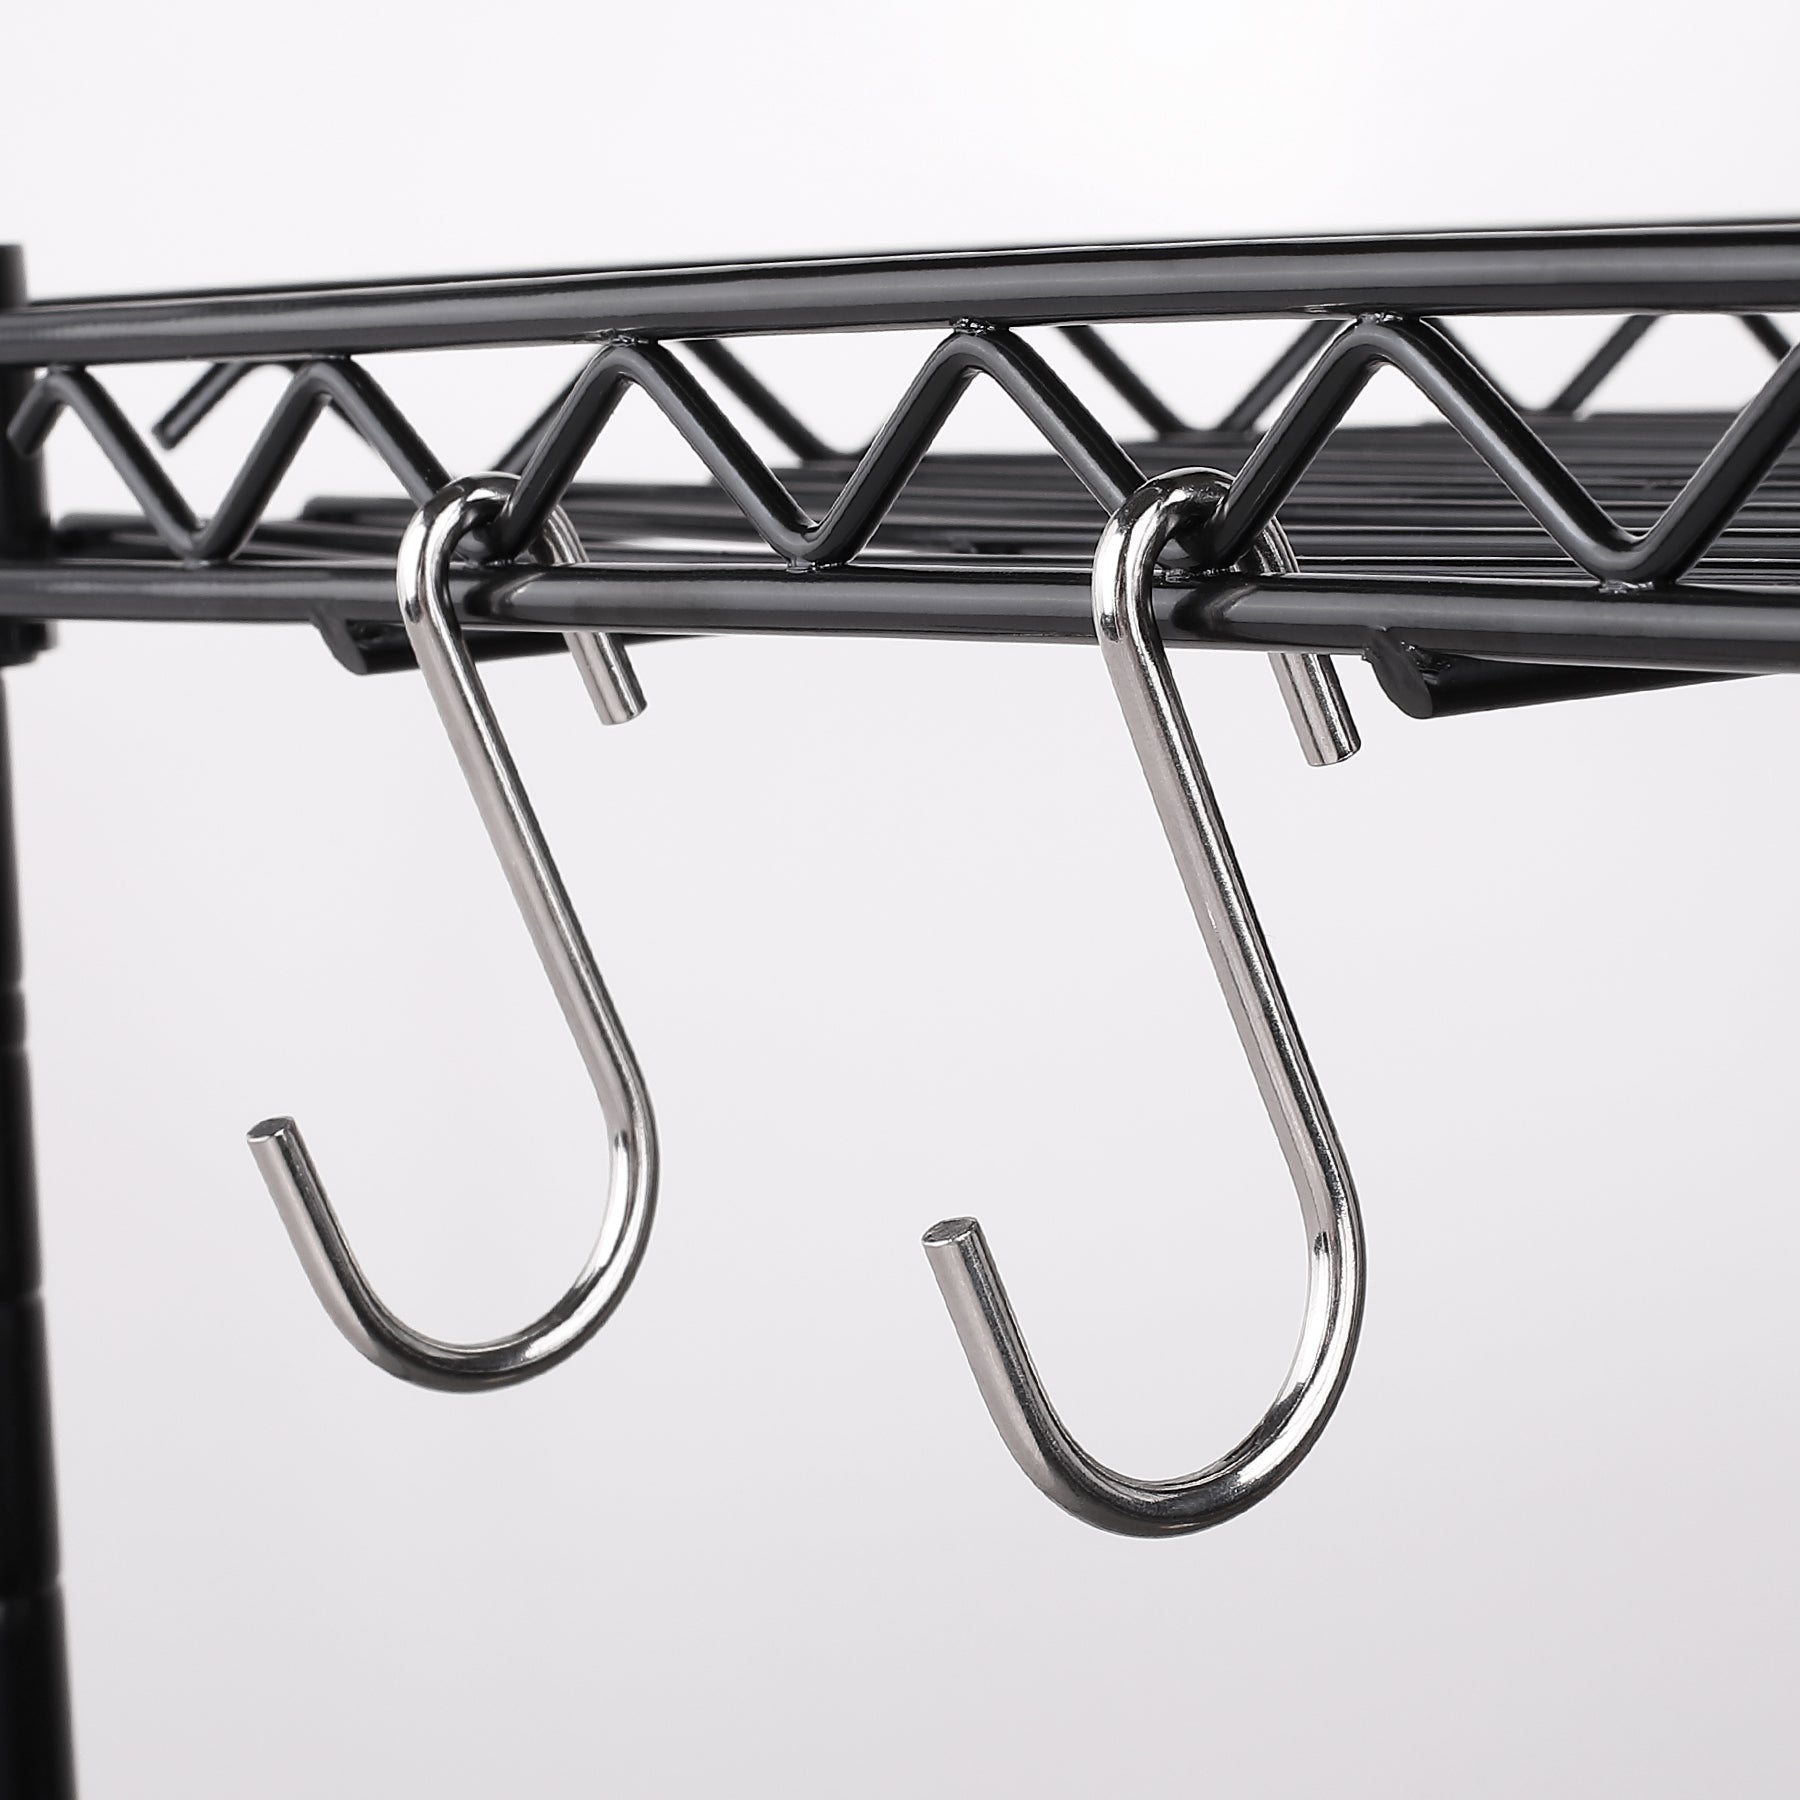 Rivexy 20 Small S Hook Pack - Chrome Coated, S Hooks for Hanging on He